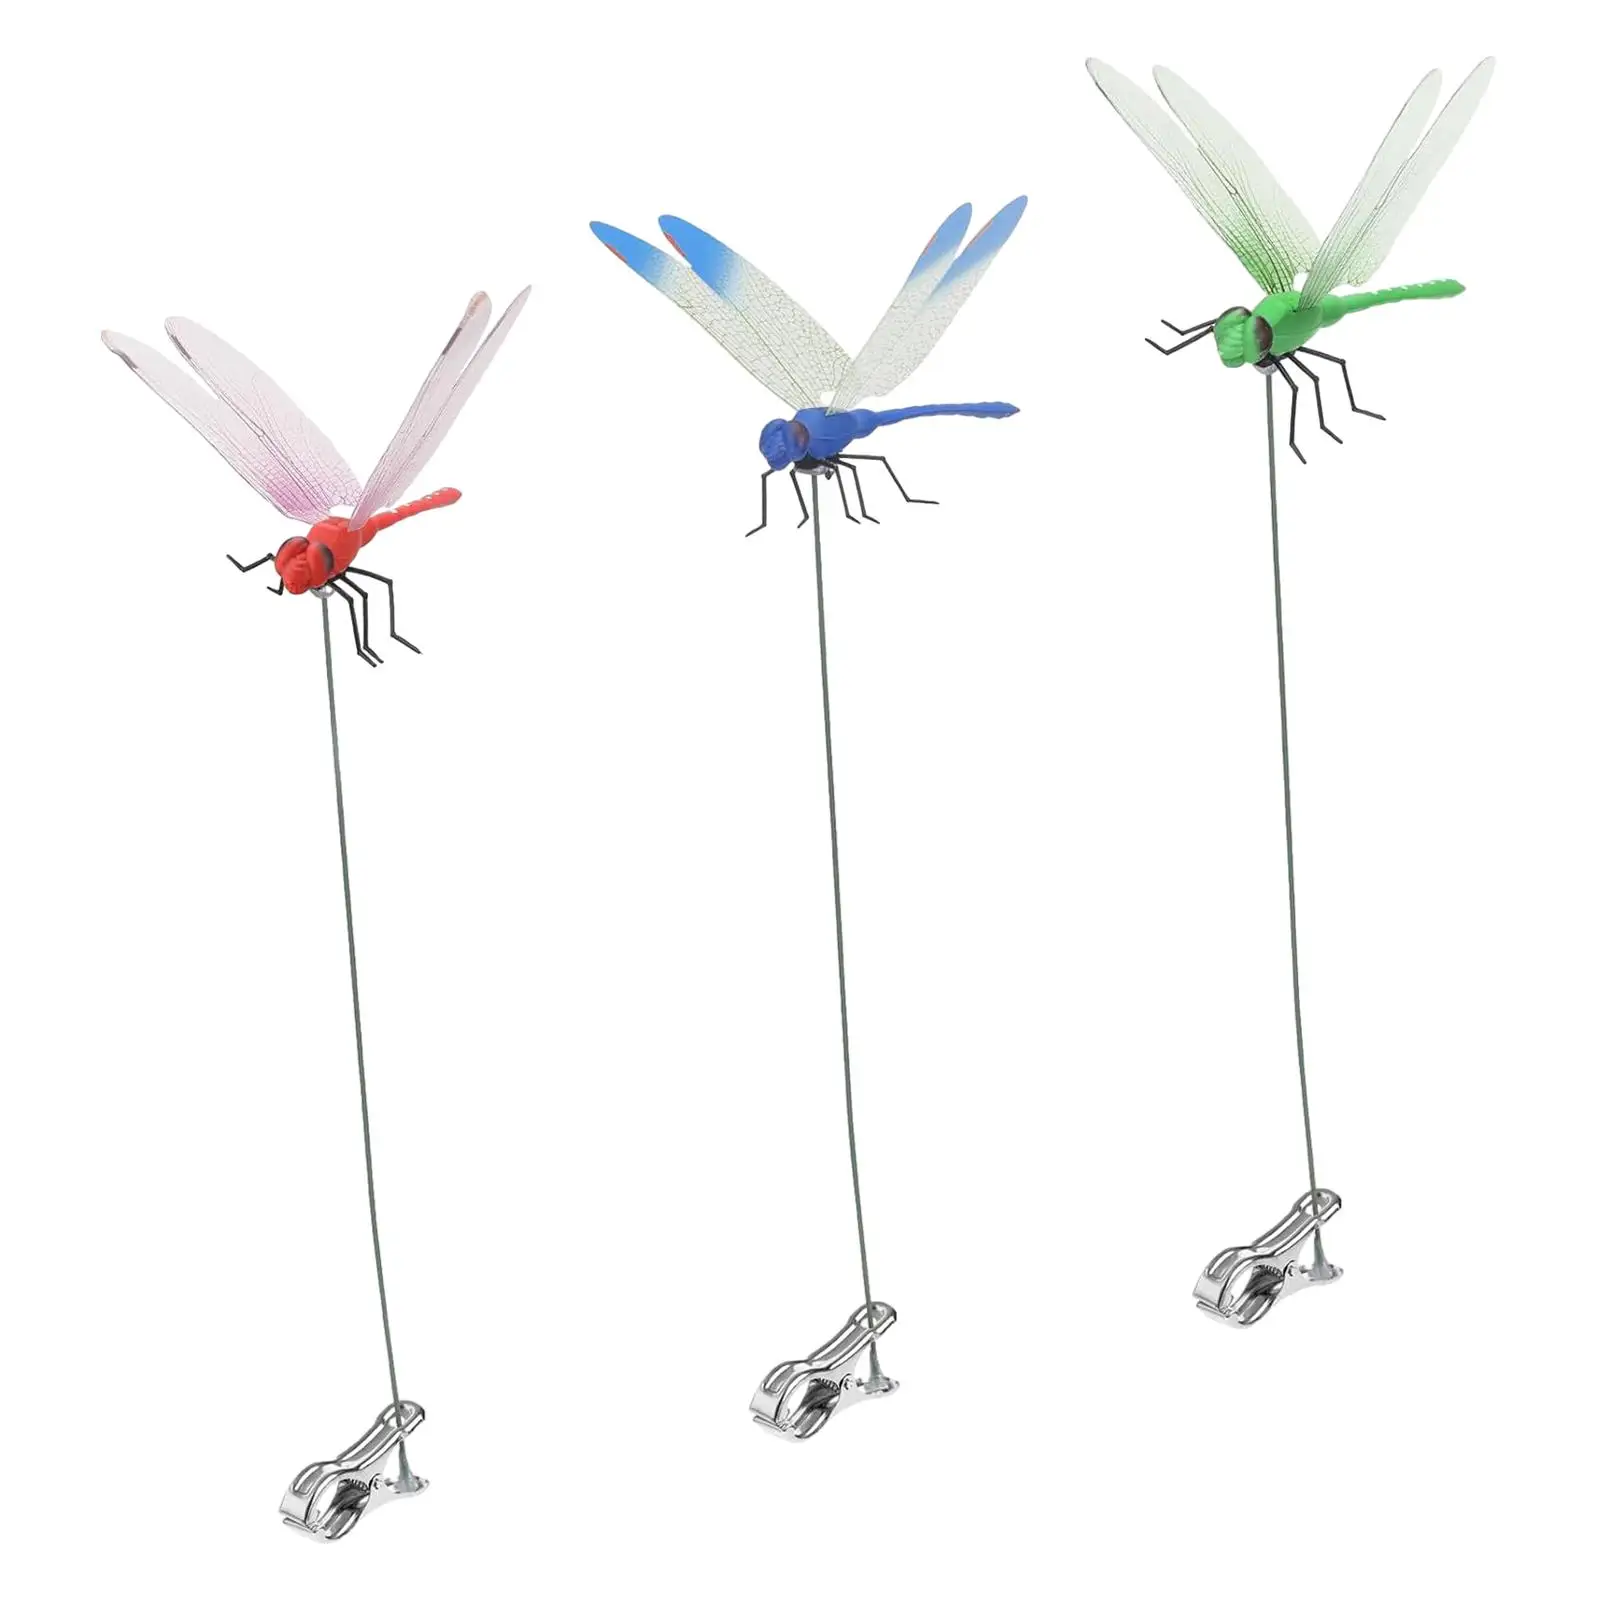 3 Pieces Artificial Dragonfly Stakes Creative Resin Simulation Dragonfly Stakes for Lawn Decor Planter Outdoor Patio Garden